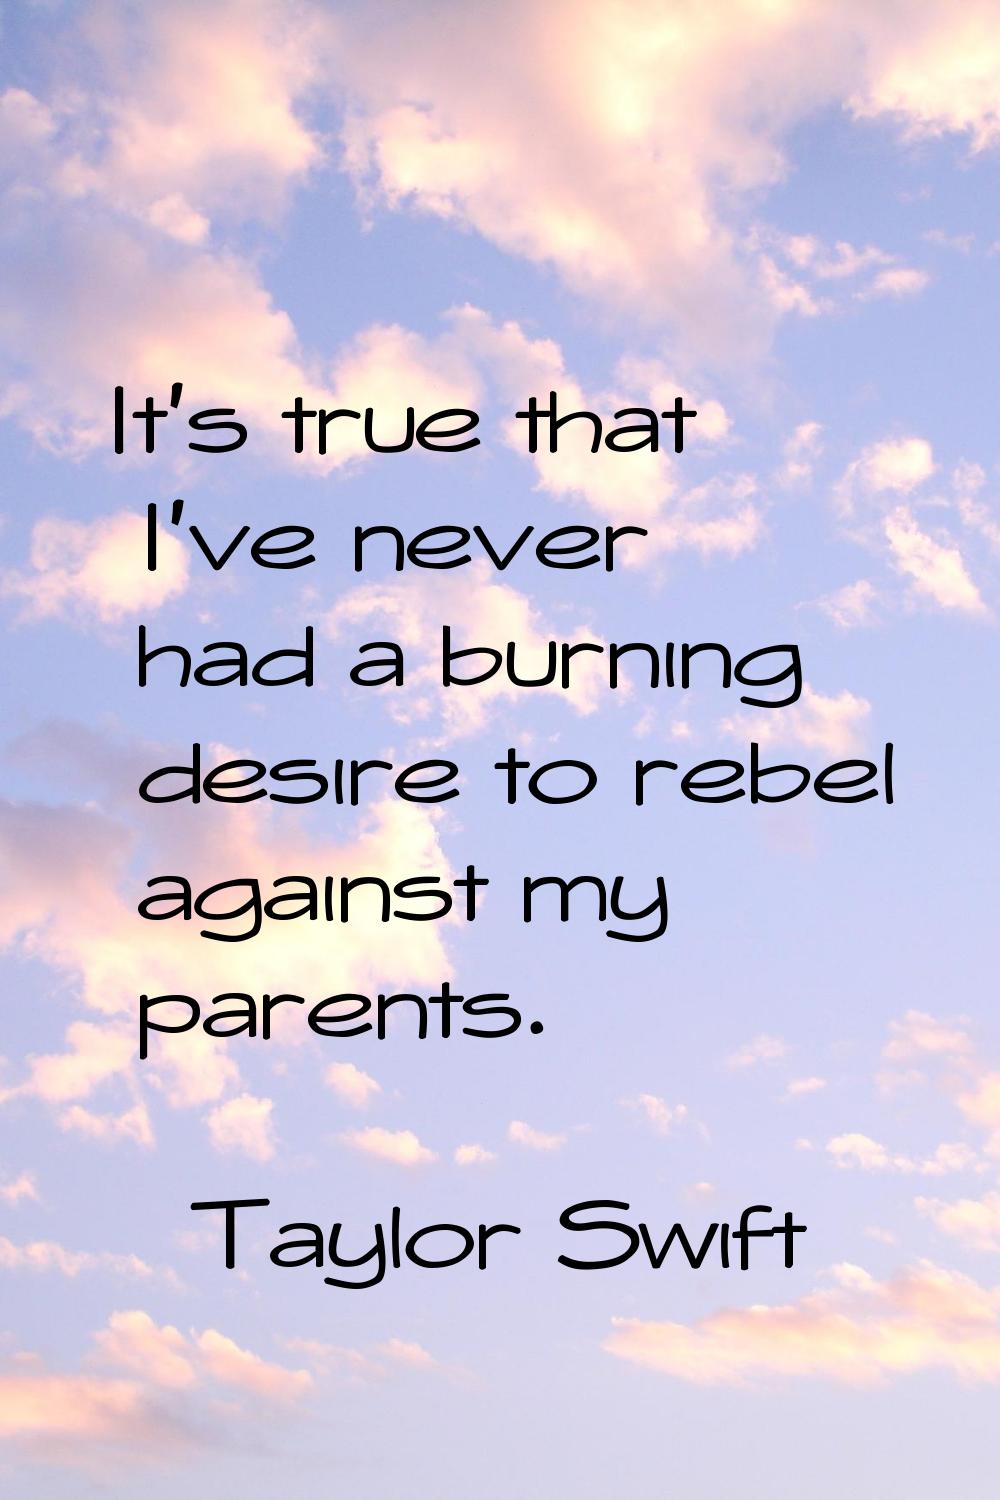 It's true that I've never had a burning desire to rebel against my parents.